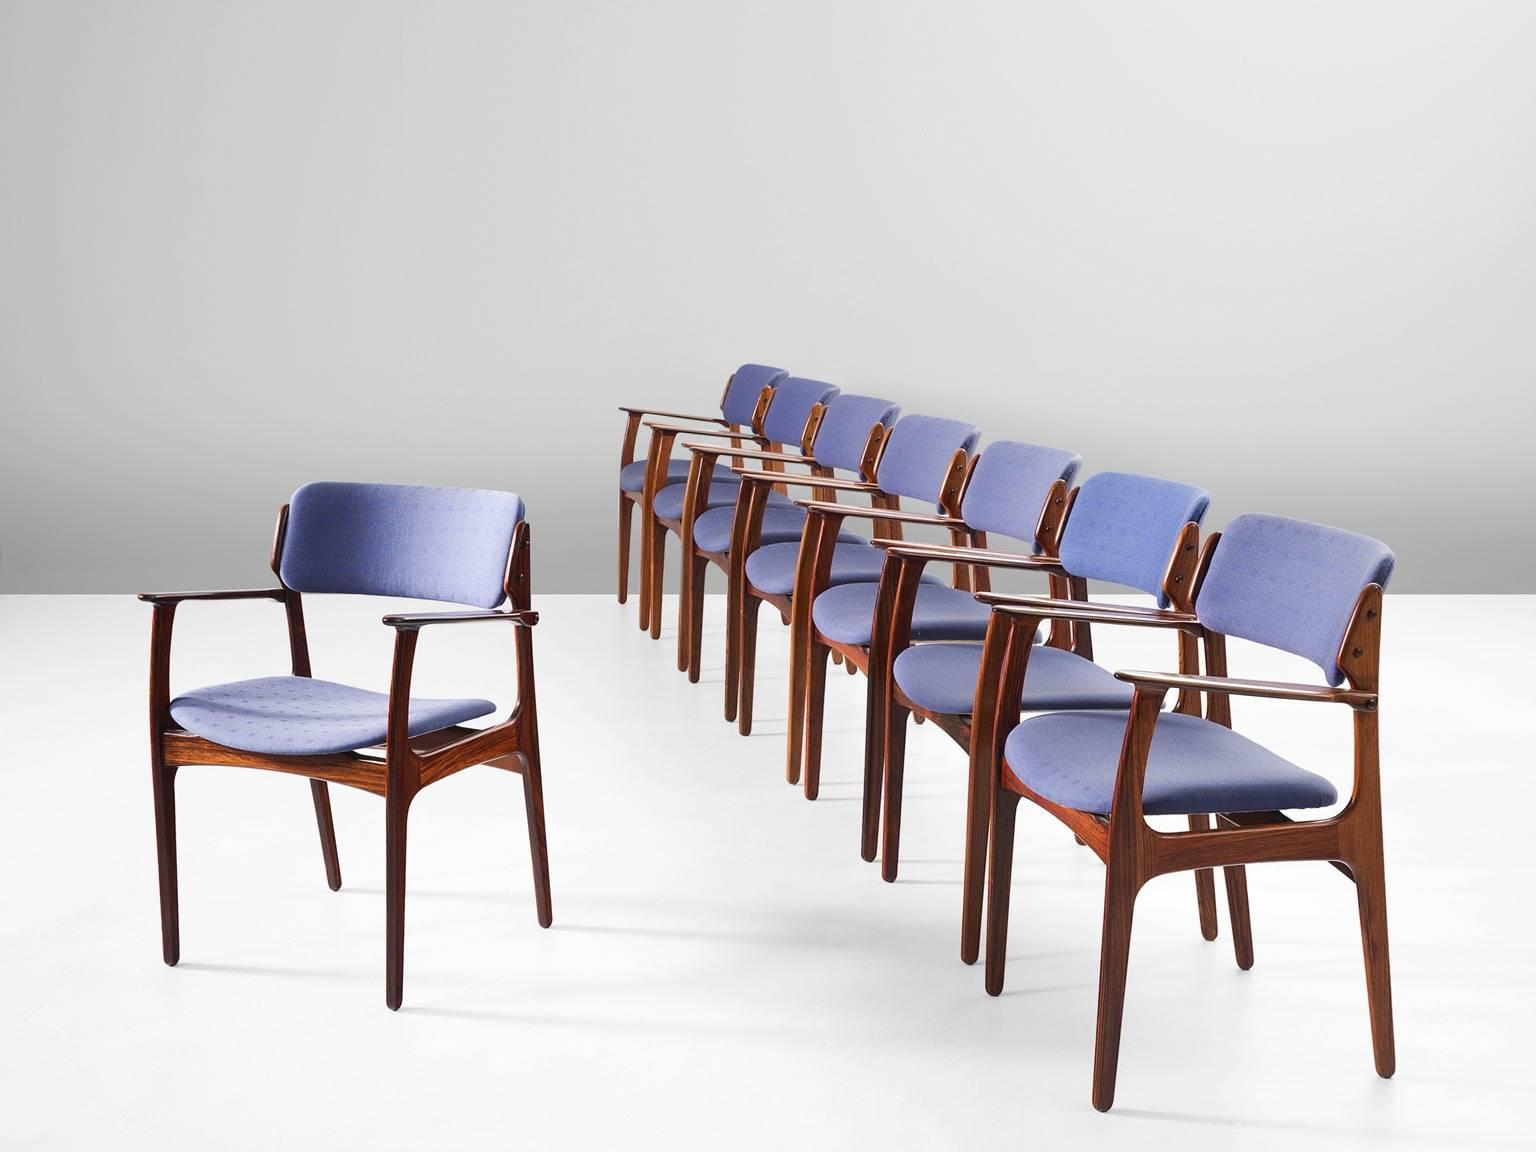 Set of eight dining chairs model 50, in rosewood and fabric, by Erik Buck, Denmark, 1957.

These chairs show elegant lines, and stunning wood connections. A solid construction with an almost floating seat and backrest. Highly comfortable due the